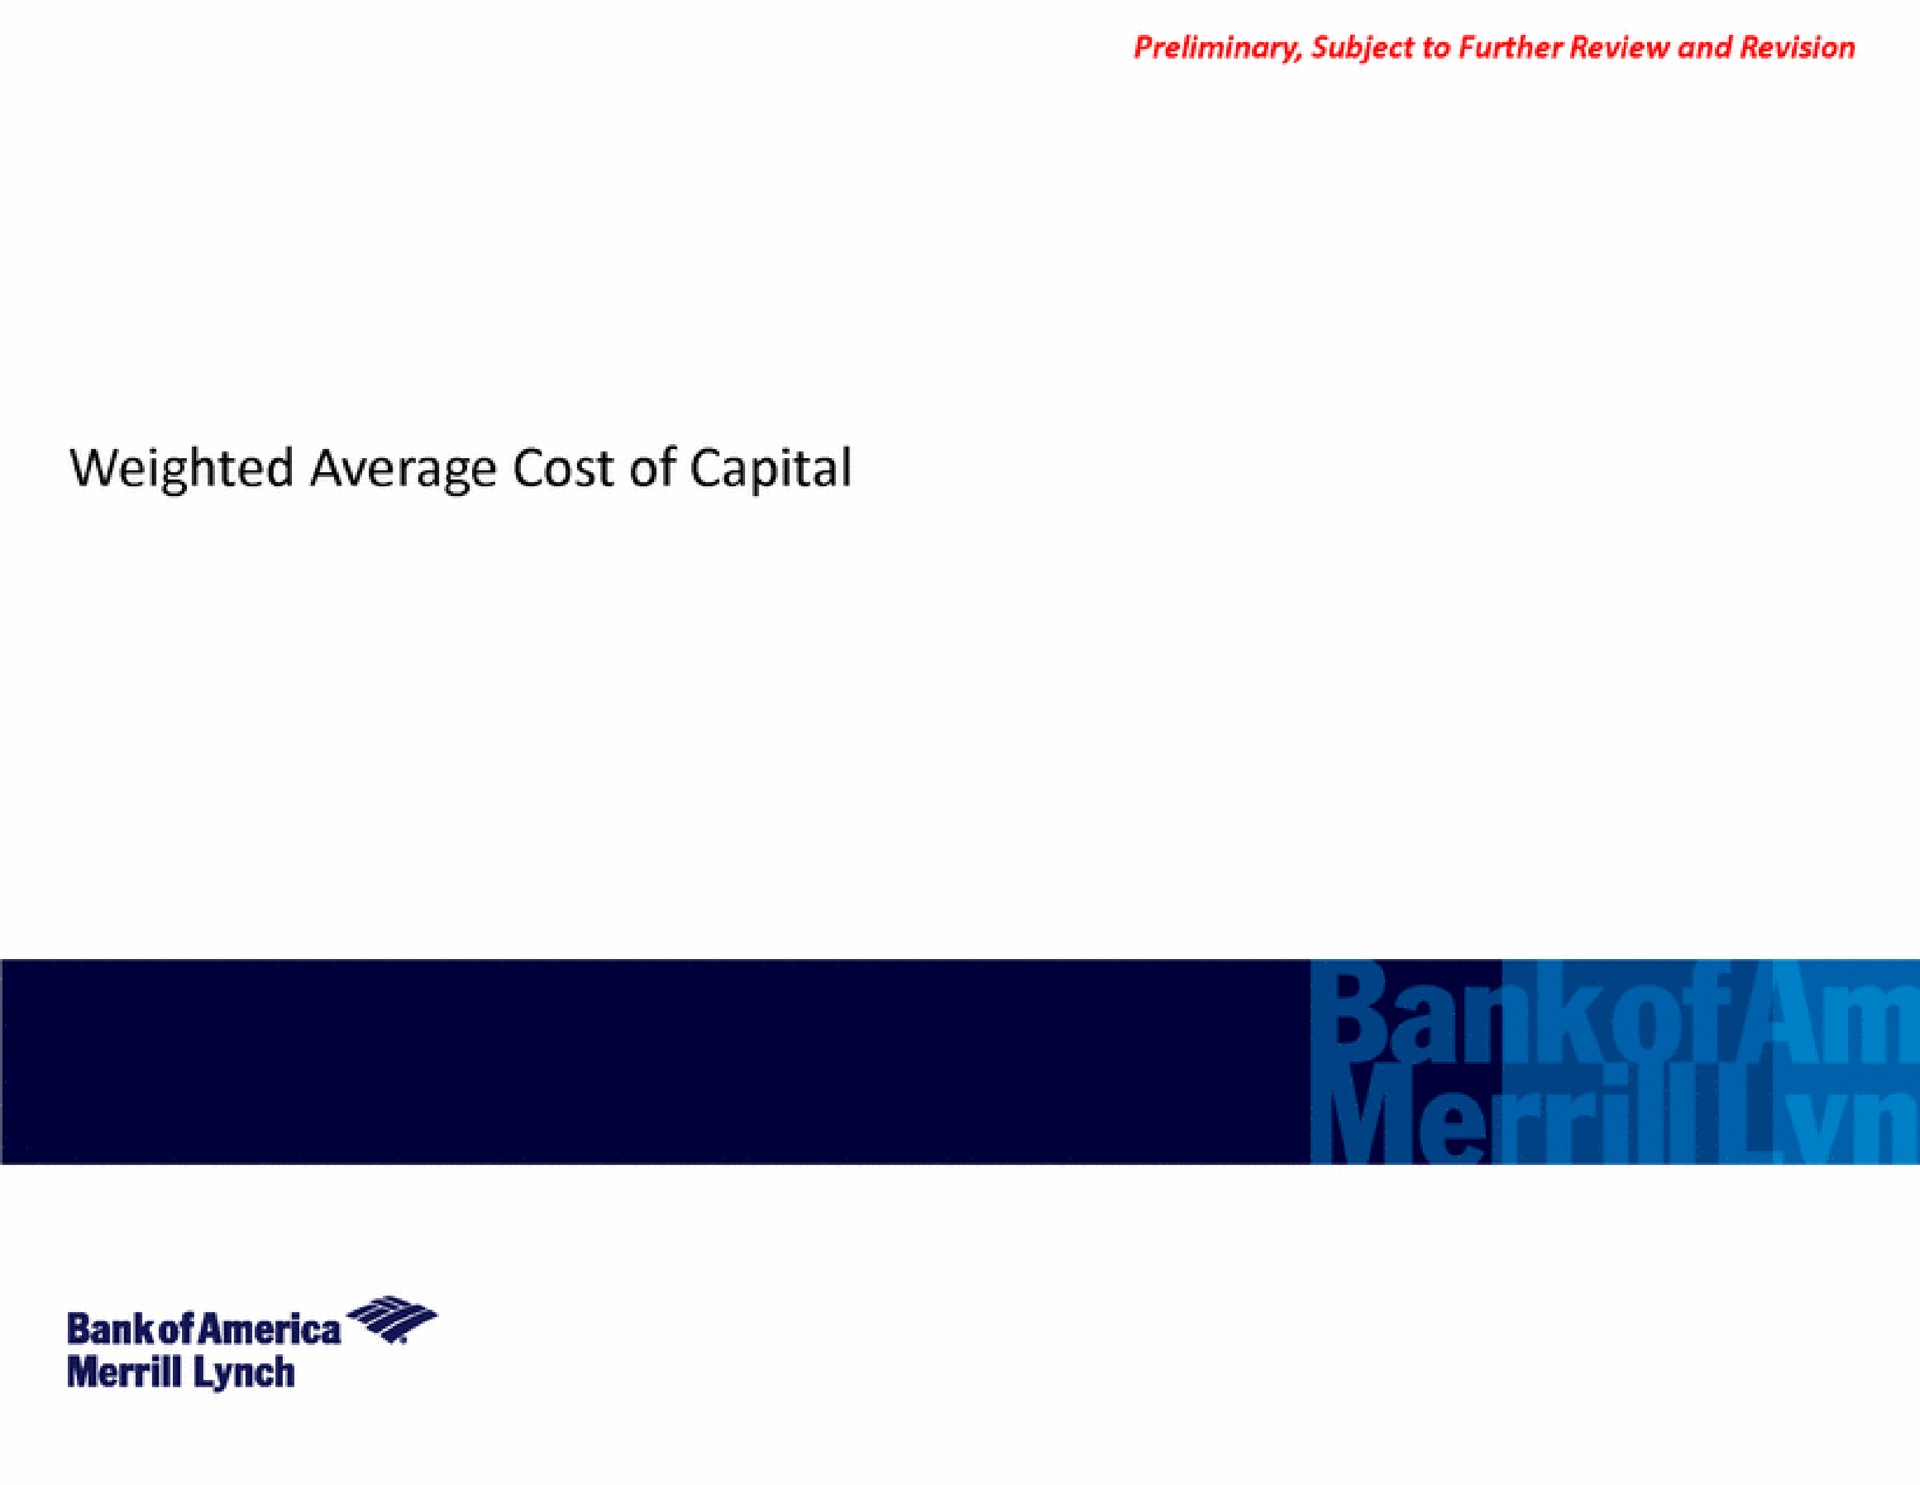 weighted average cost of capital lynch | Bank of America